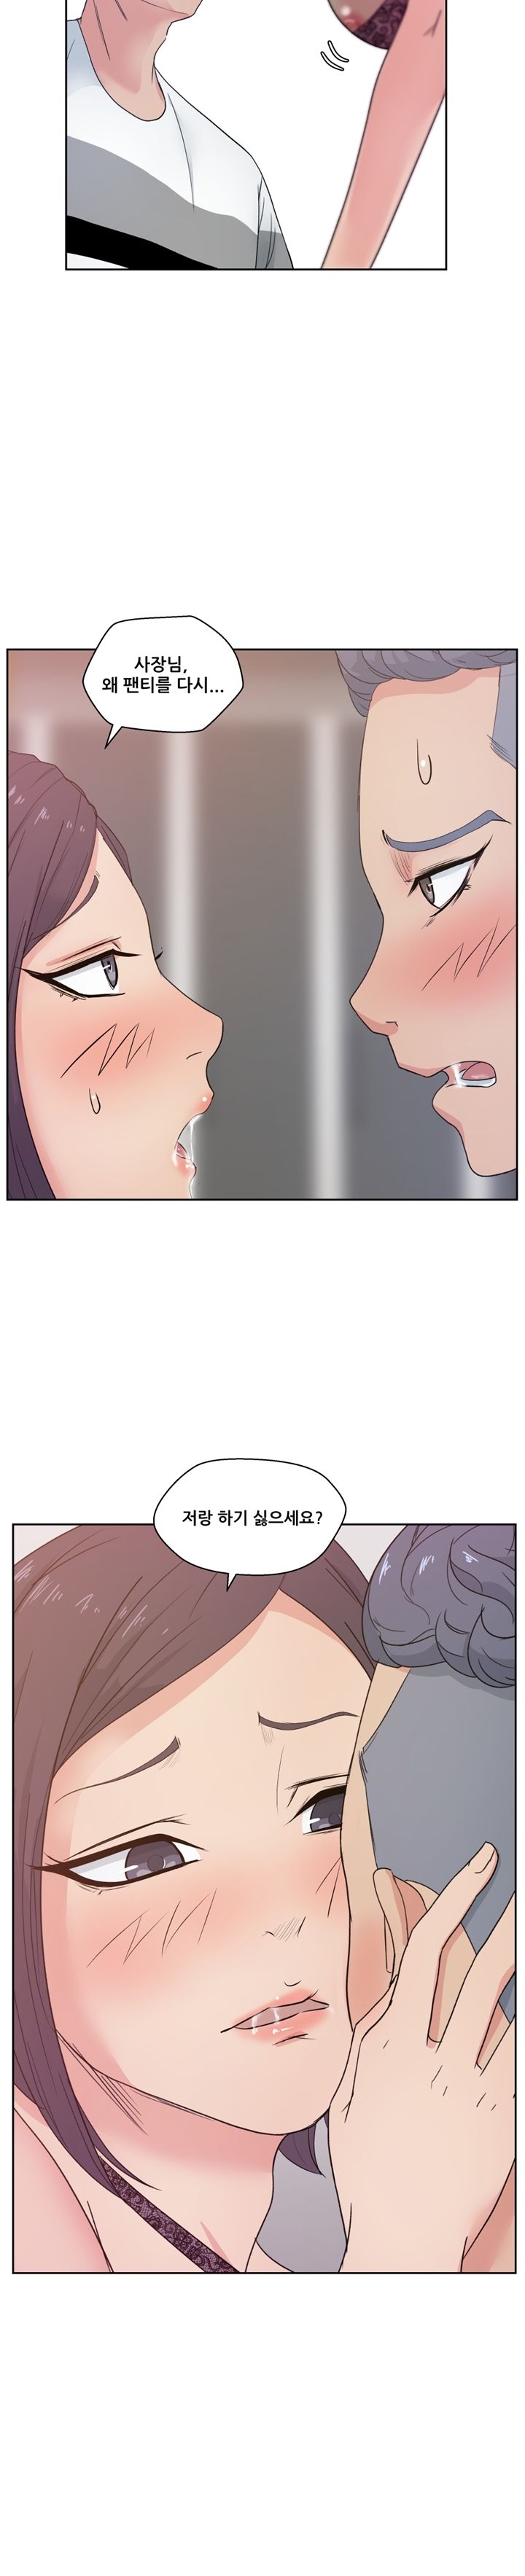 Sooyung Comic Shop Raw - Chapter 12 Page 6